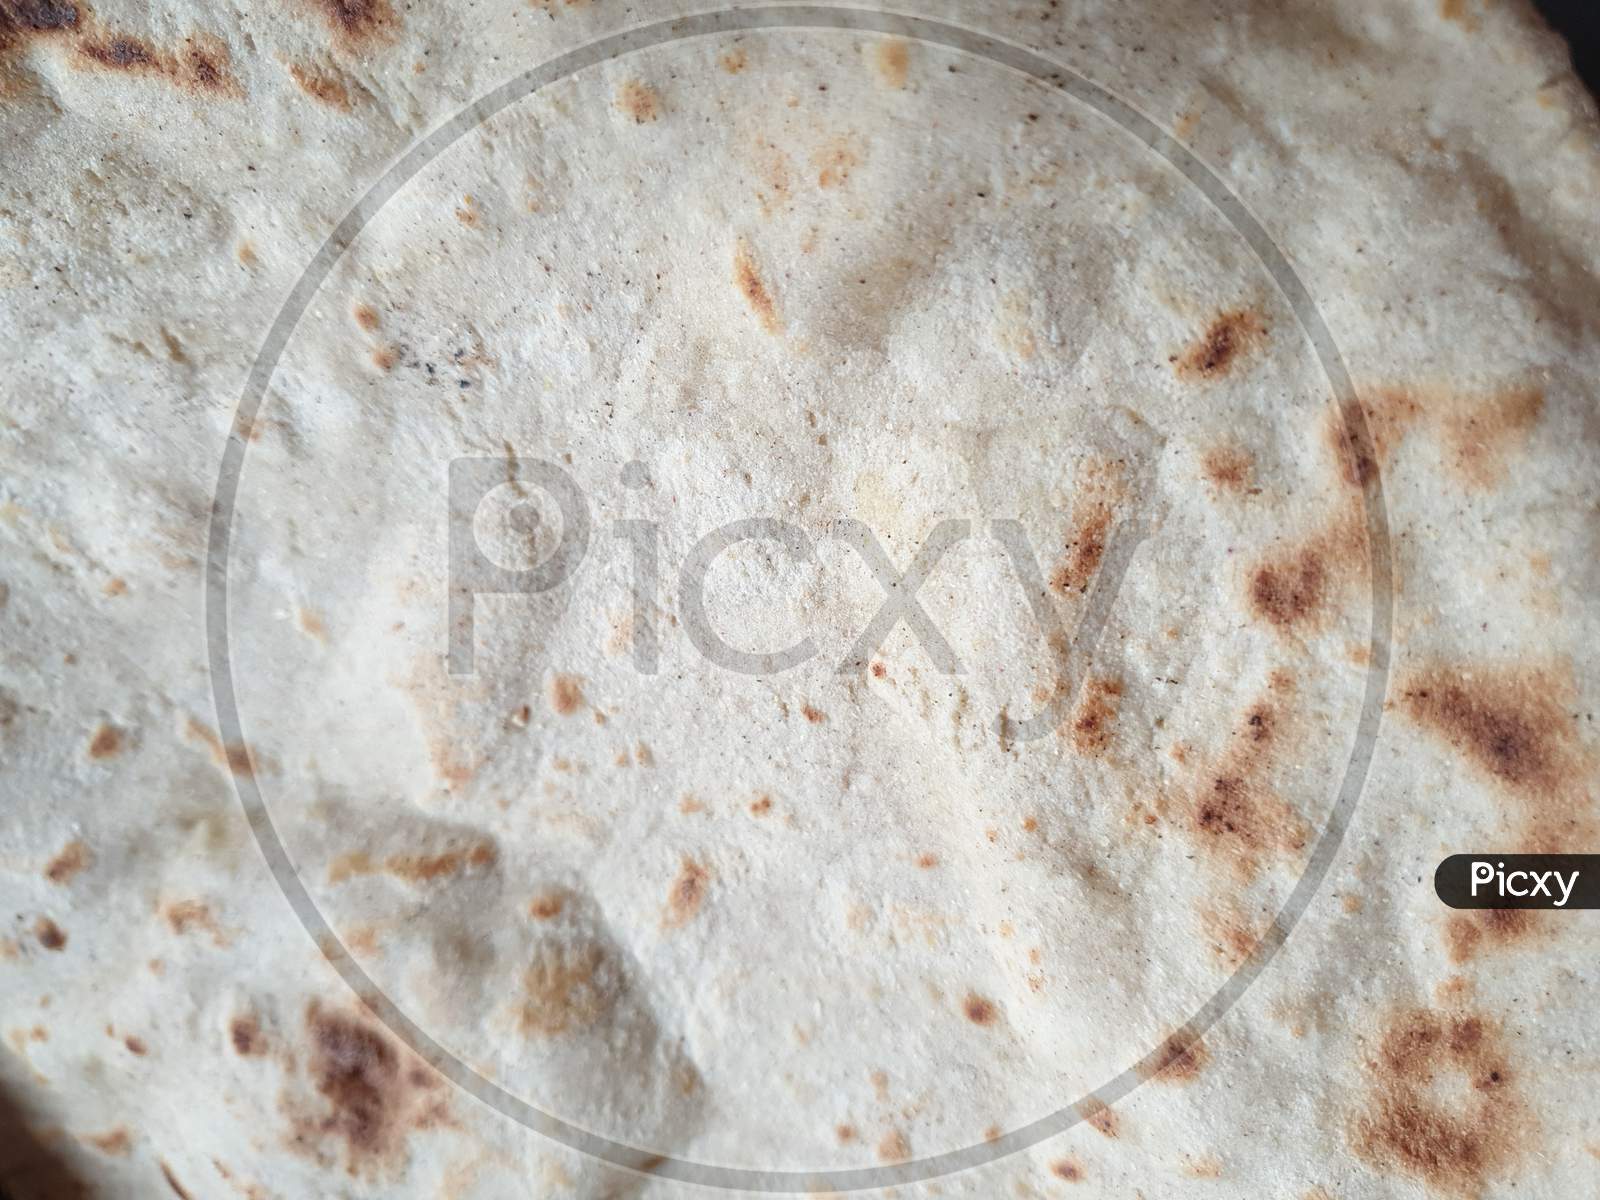 This is a delicious jowar roti